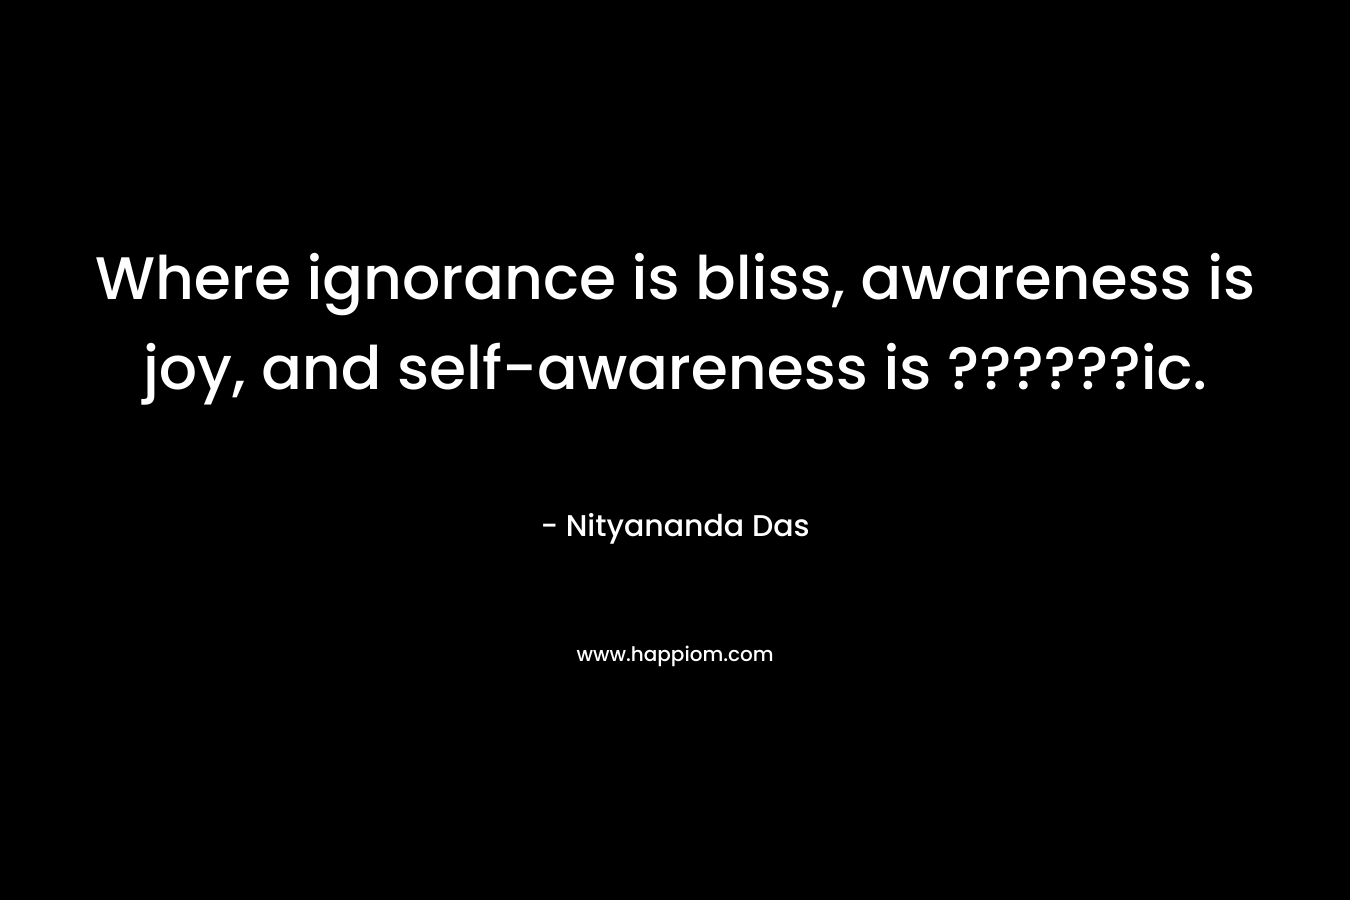 Where ignorance is bliss, awareness is joy, and self-awareness is ??????ic.